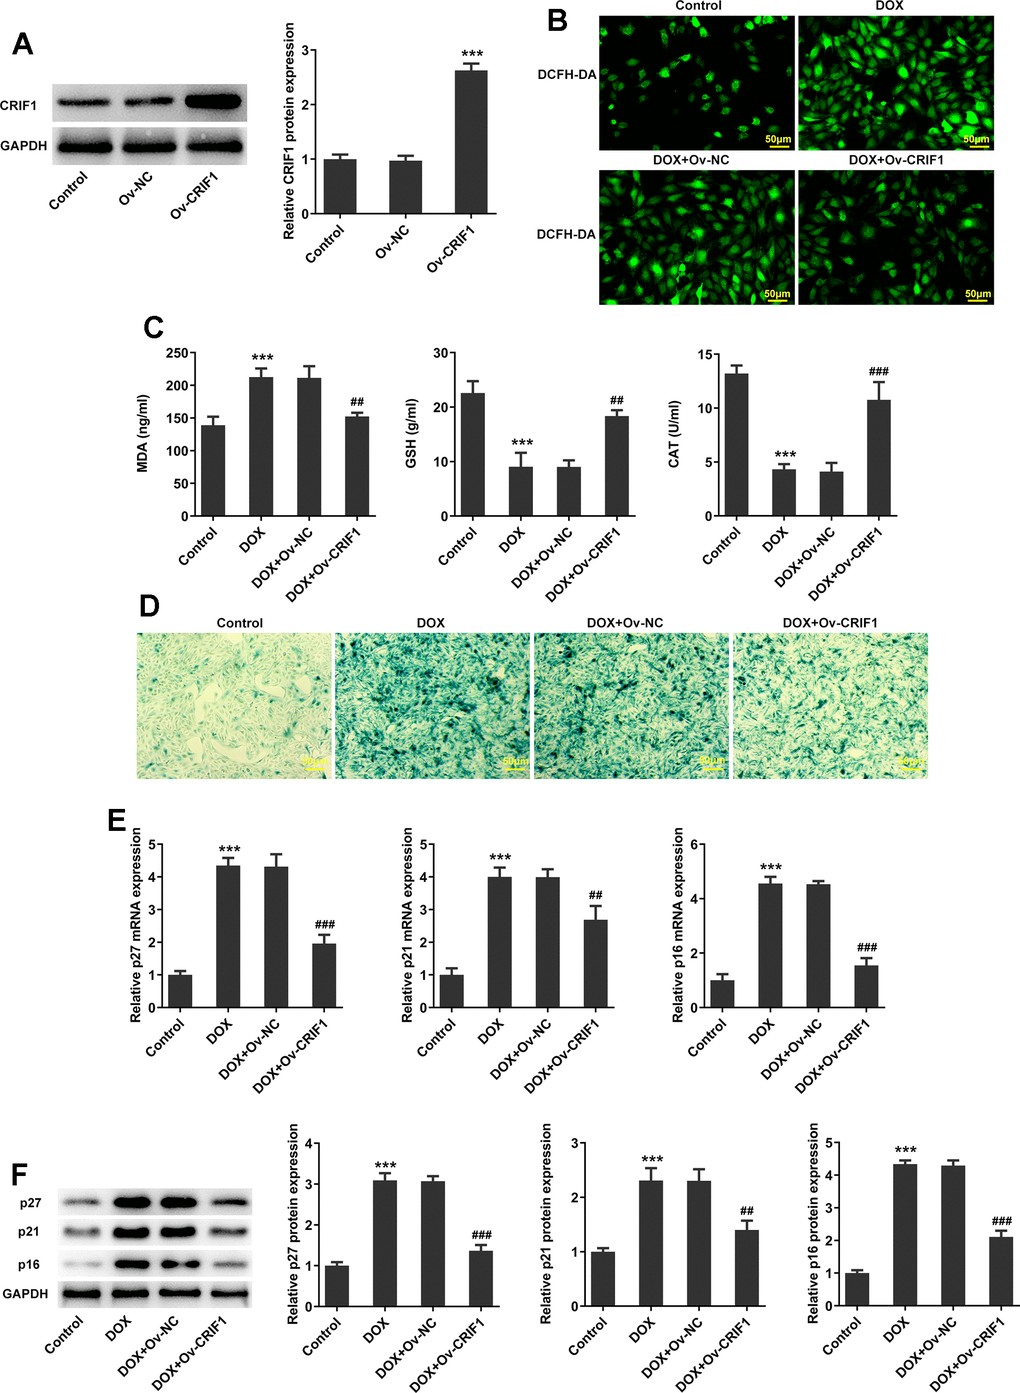 CRIF1 overexpression inhibited oxidative stress and senescence in DOX-induced AC16 cells. (A) AC16 cells were transfected with Ov-NC or Ov-CRIF1, and the overexpression efficacy of CRIF1 was detected by western blot. ***PB) DCFH-DA staining was used to detect ROS levels. (C) The expression levels of MDA, GSH and CAT in cells were detected by biochemical kits. (D) SA-β-gal staining was used to observe the level of cell senescence. (E, F) RT-qPCR and western blot were used to detect the expression of p27, p21, and p16. ***P